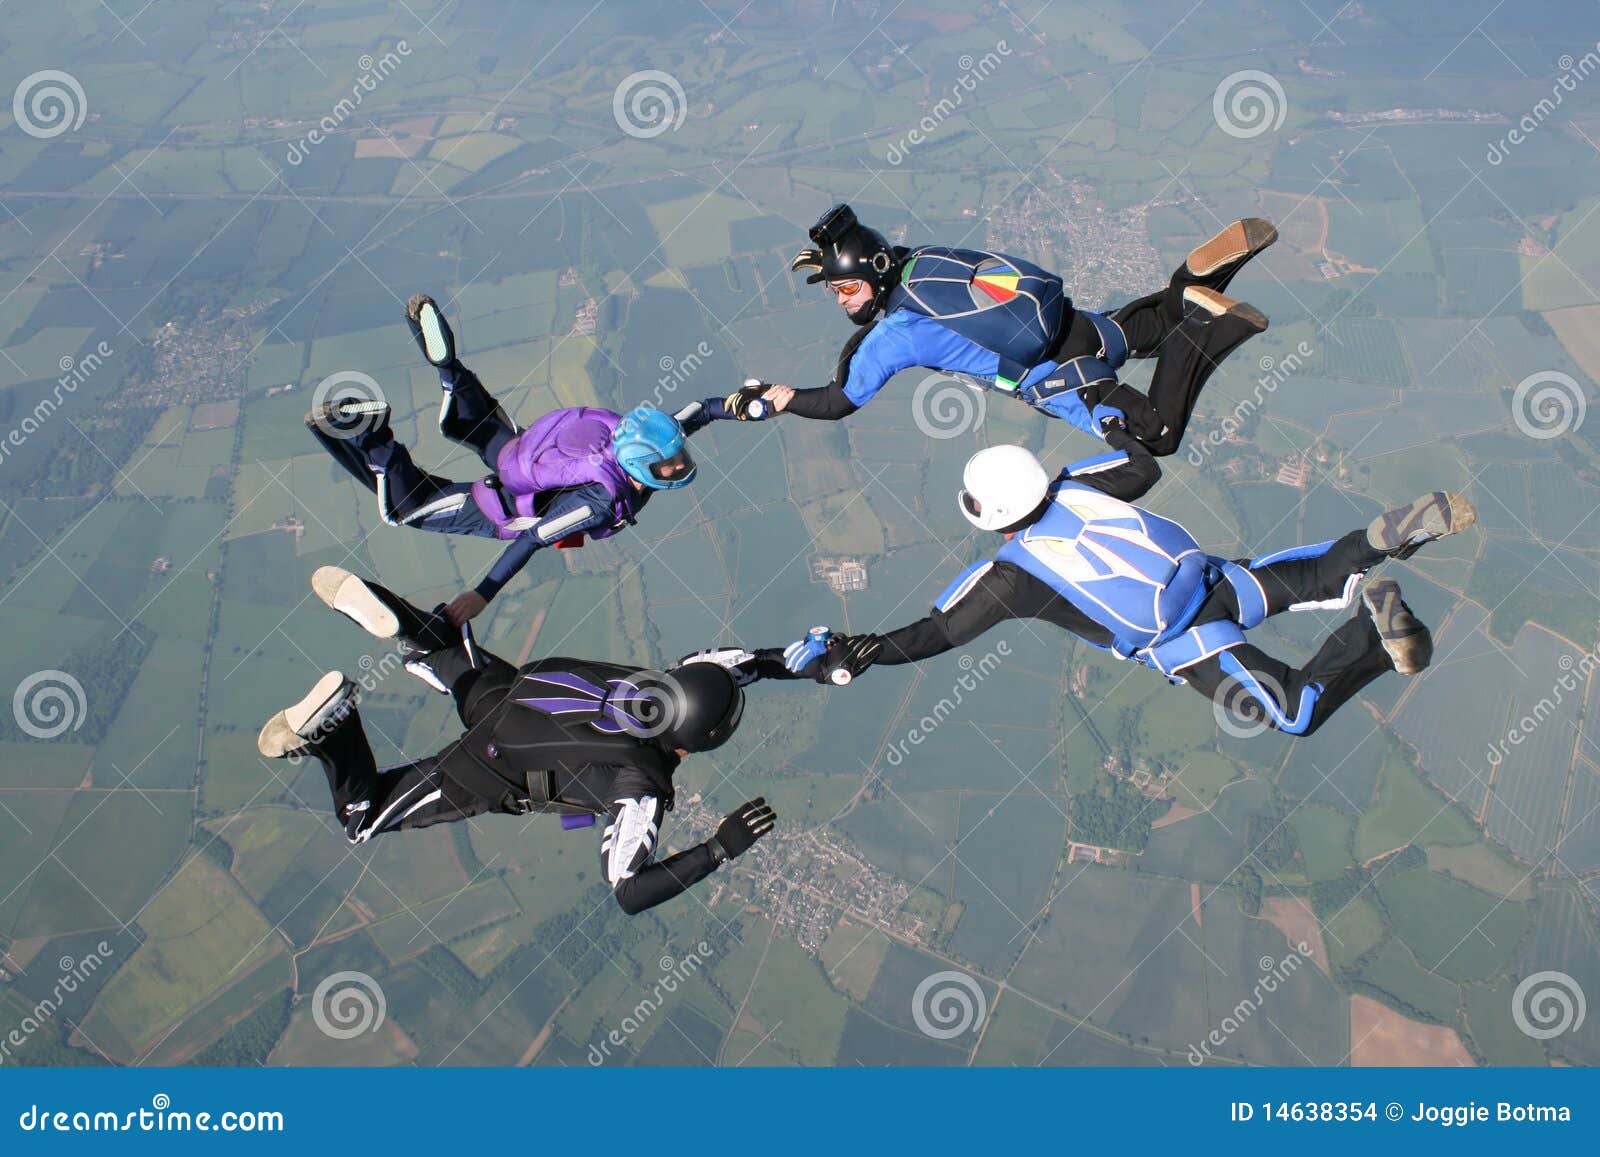 four skydivers holding hands